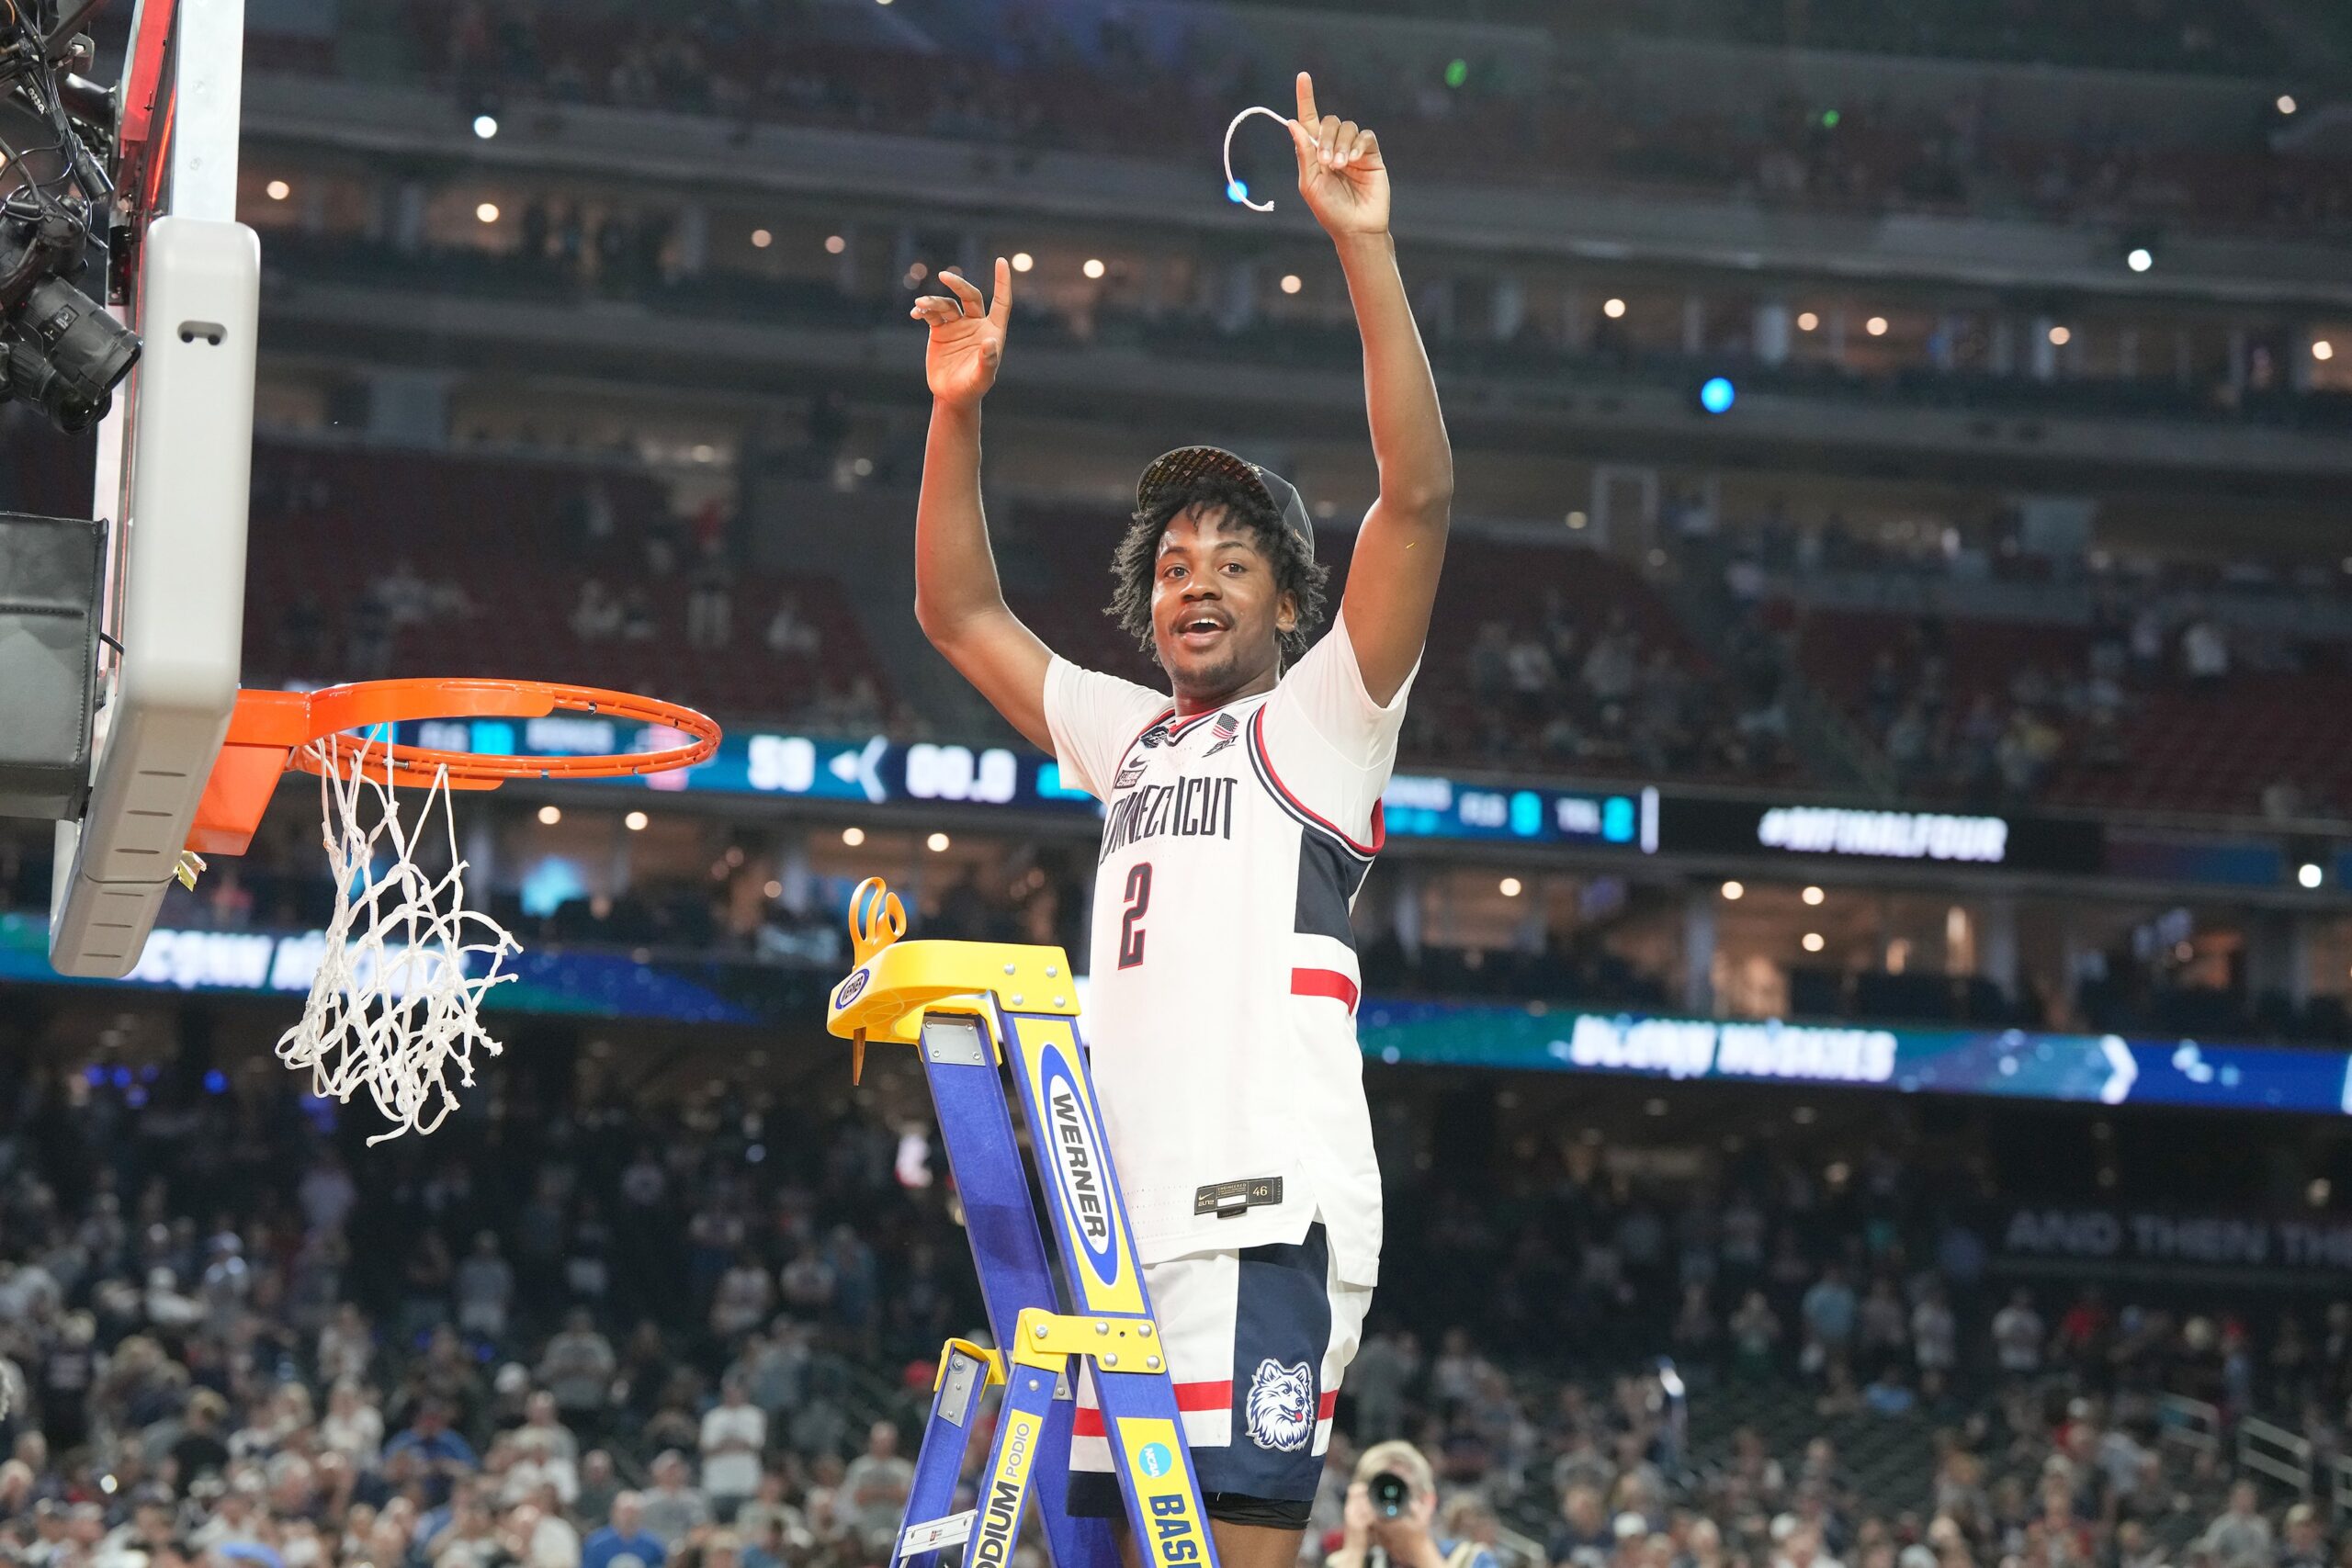 Tristen Newton #2 of the Connecticut Huskies cuts the net after winning the NCAA Men's Basketball Tournament championship game against the San Diego State Aztecs at NRG Stadium on April 3, 2023, in Houston, Texas. 